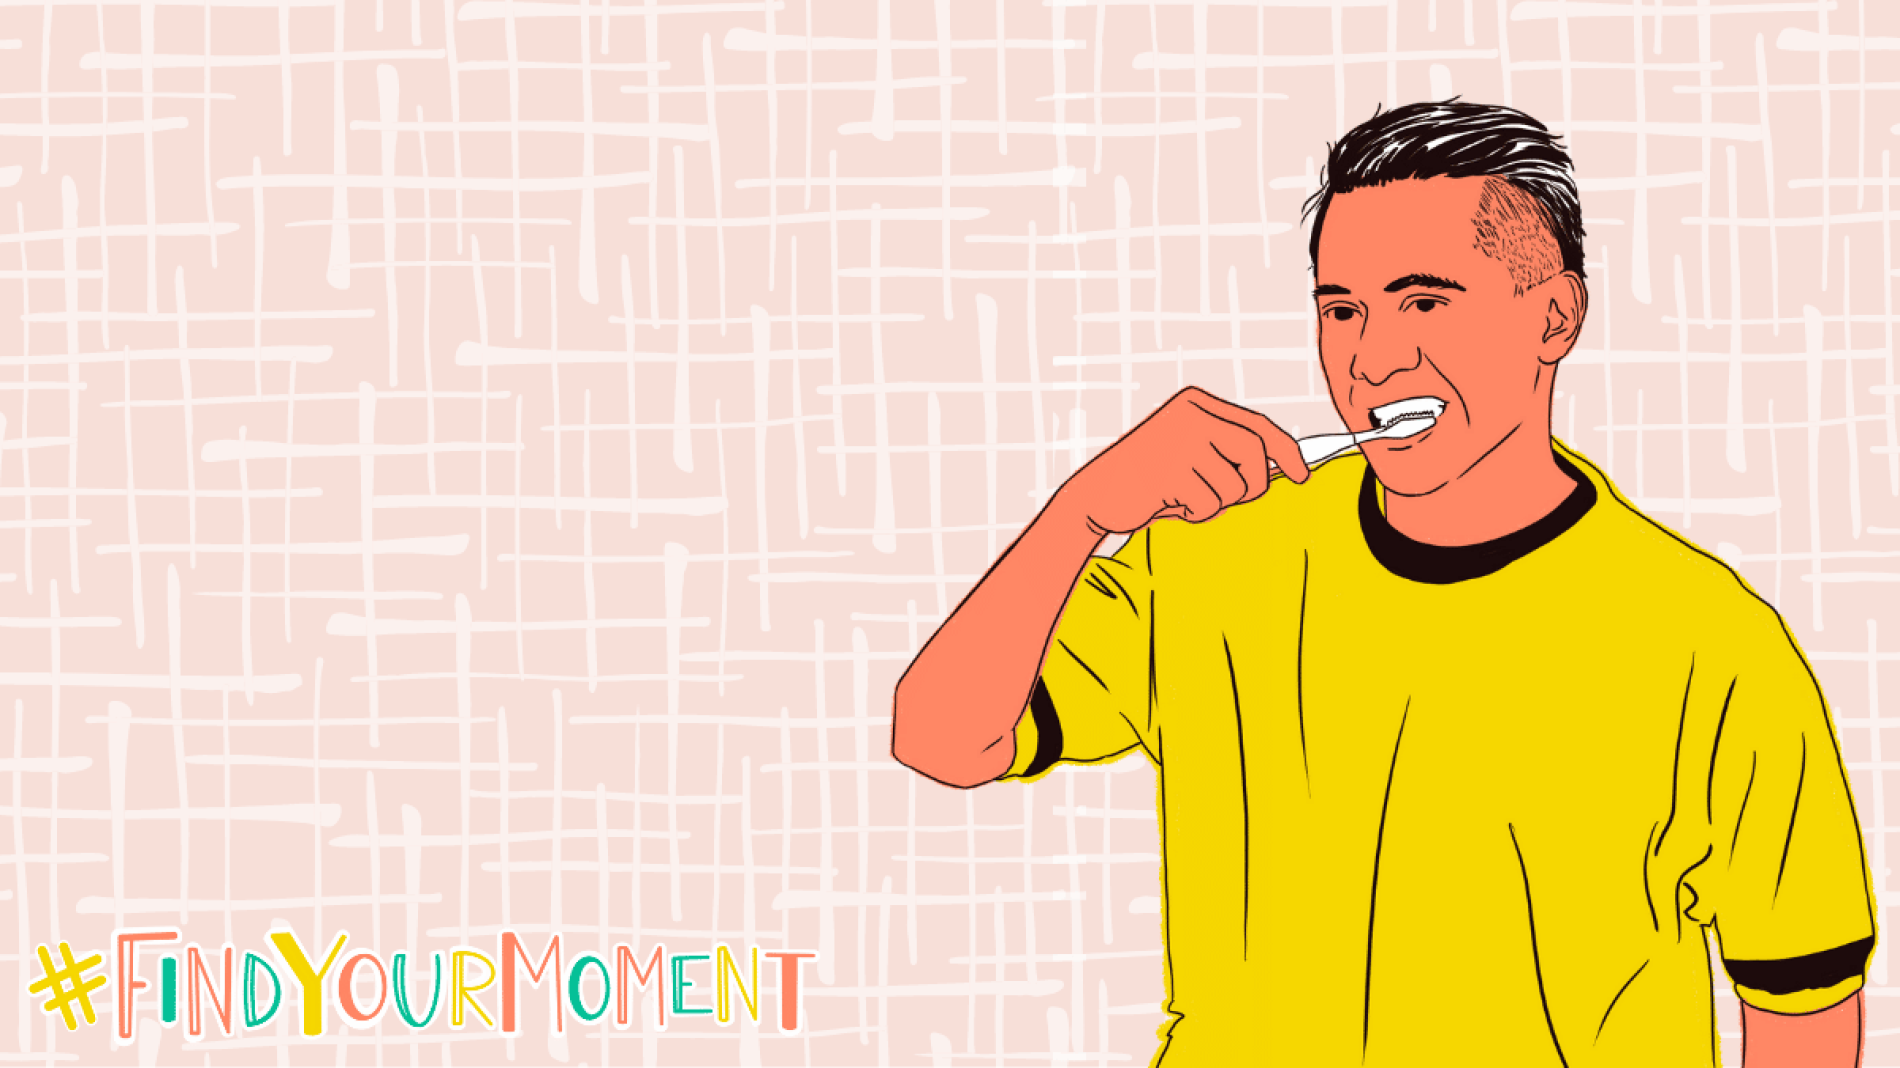 Illustration of a person brushing their teeth